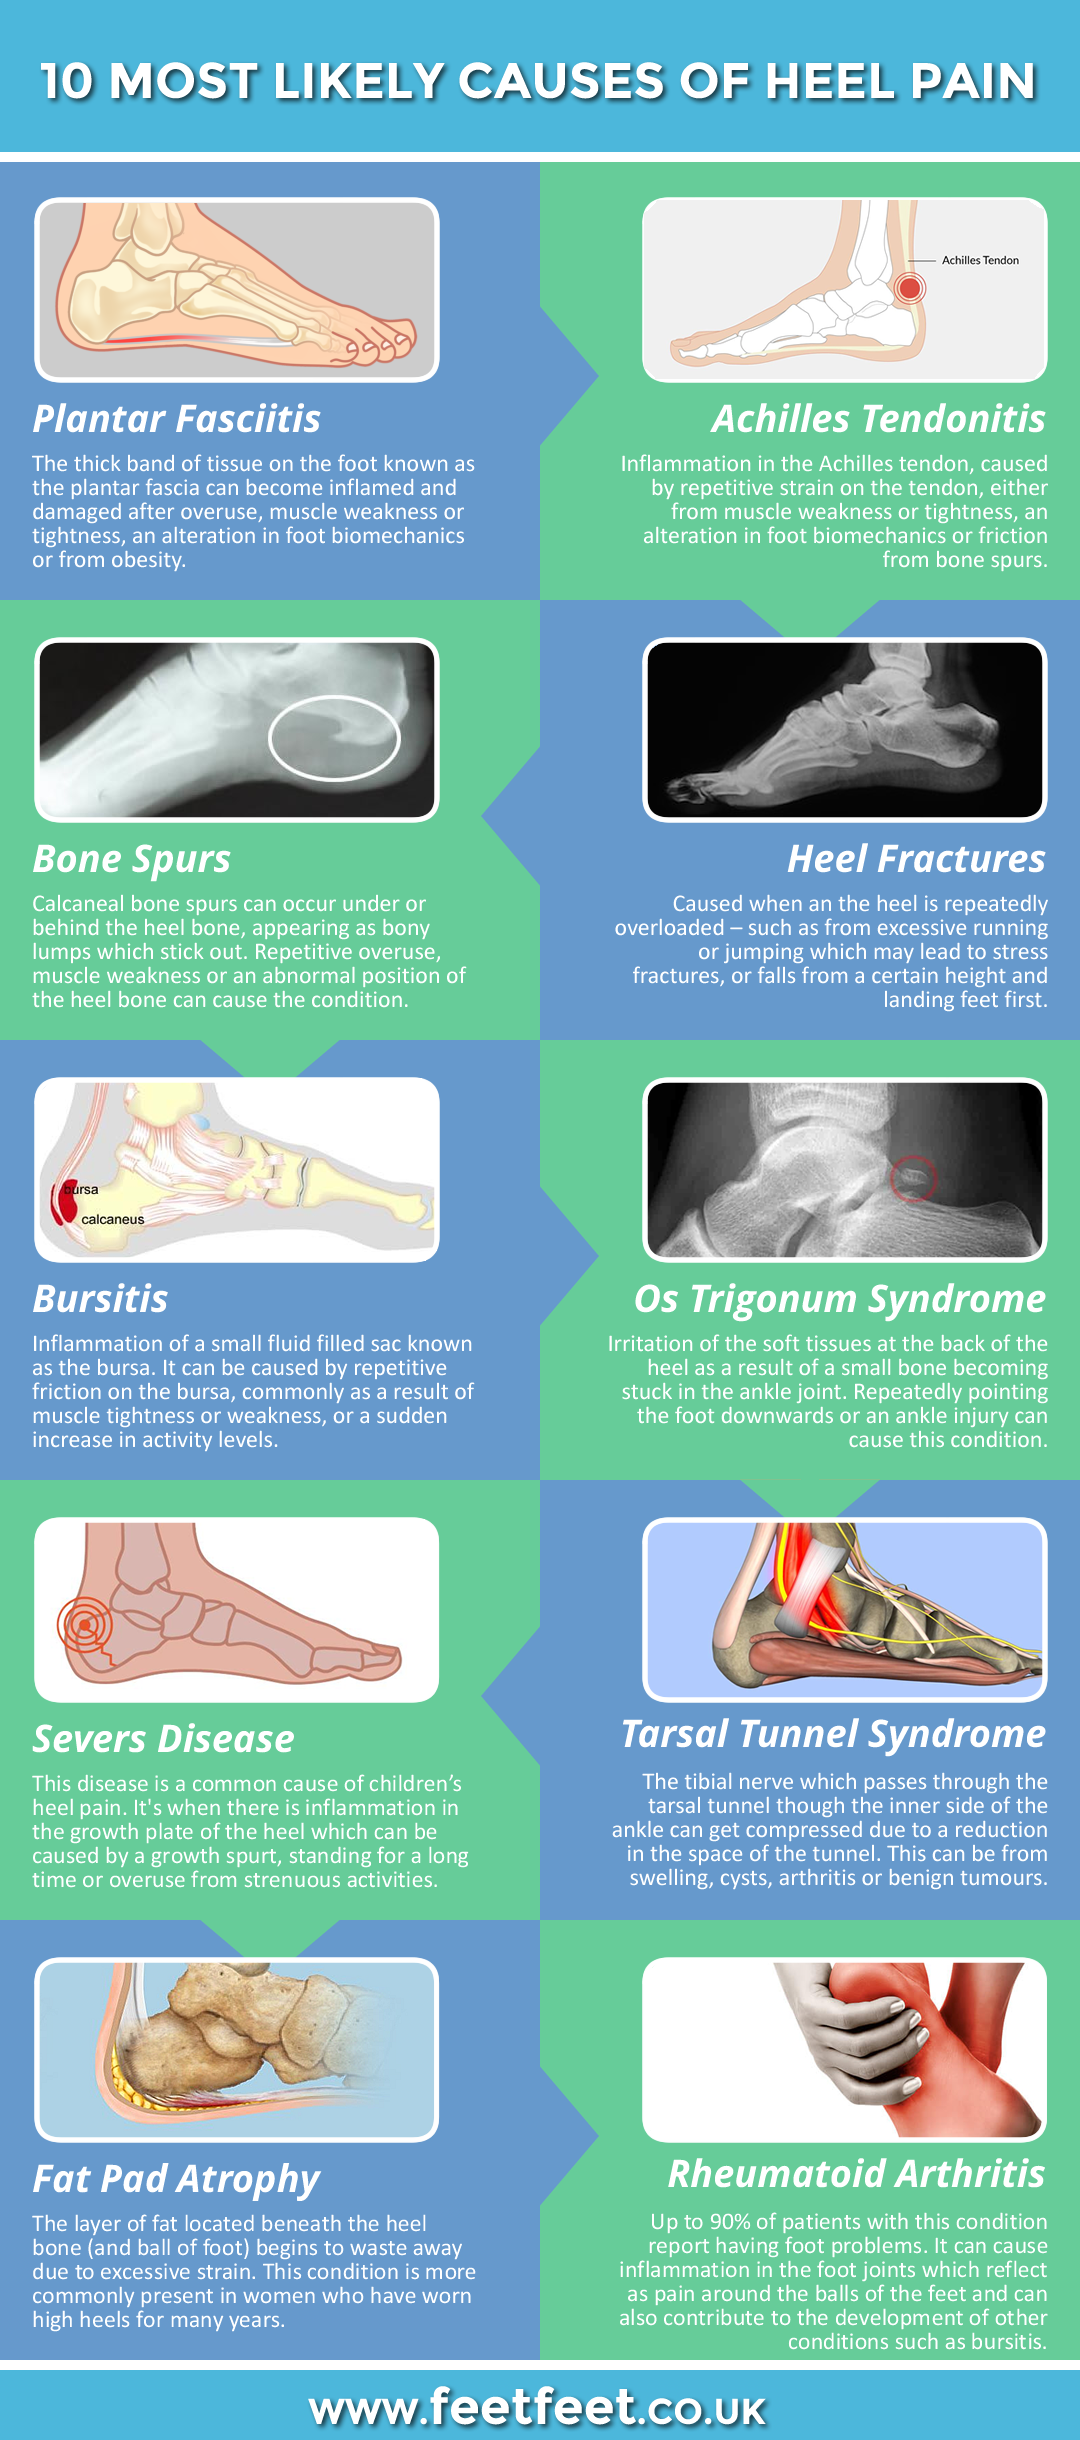 10 Most Likely Causes of Heel Pain